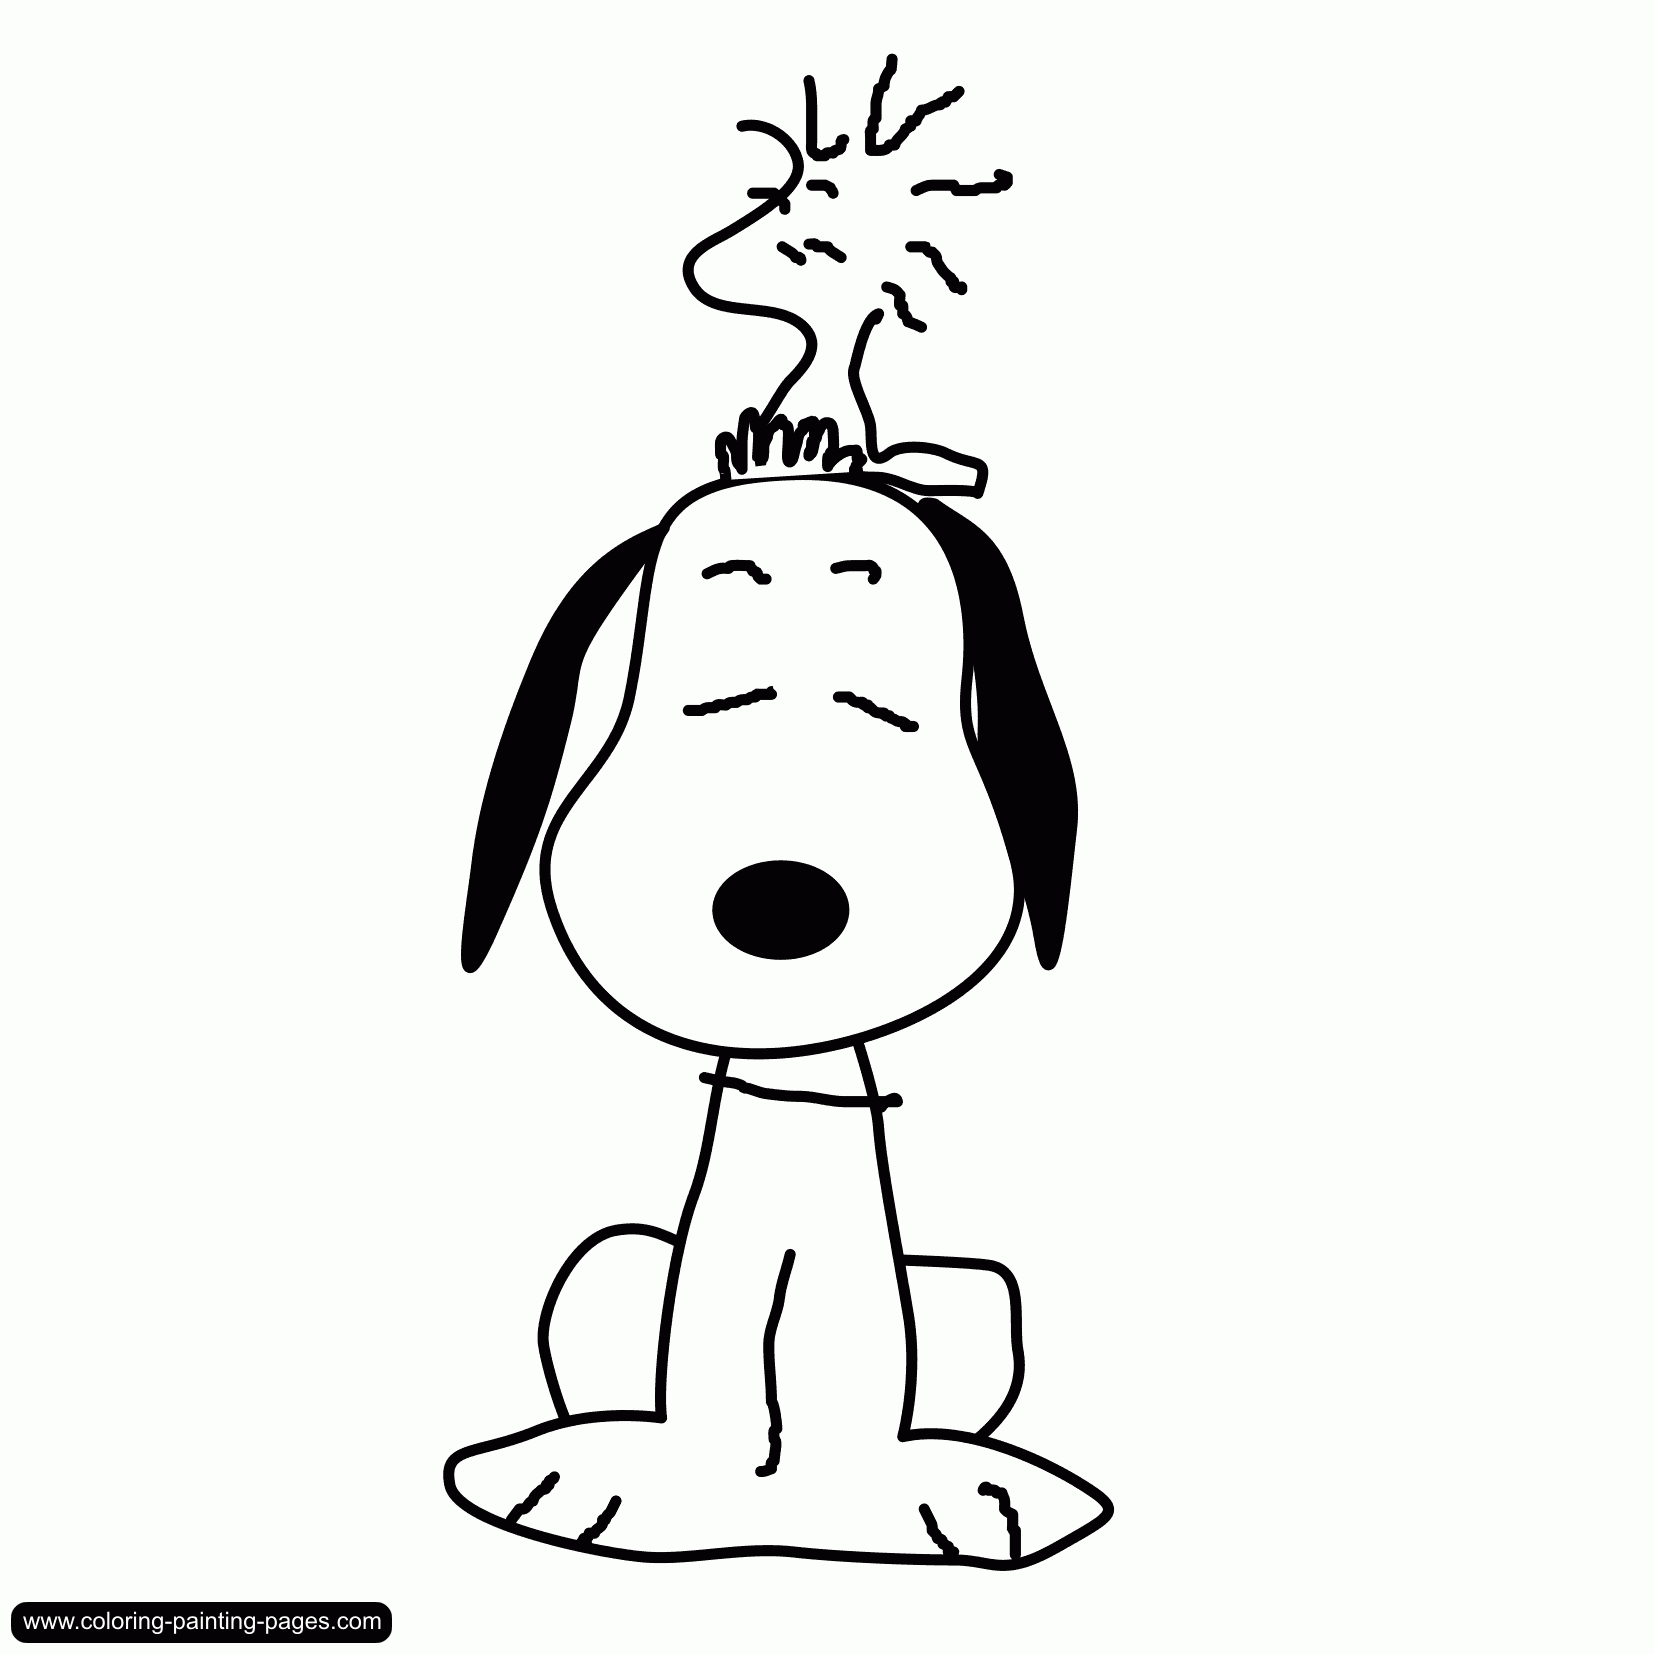 Snoopy Christmas Coloring Pages Printable, Free Printable